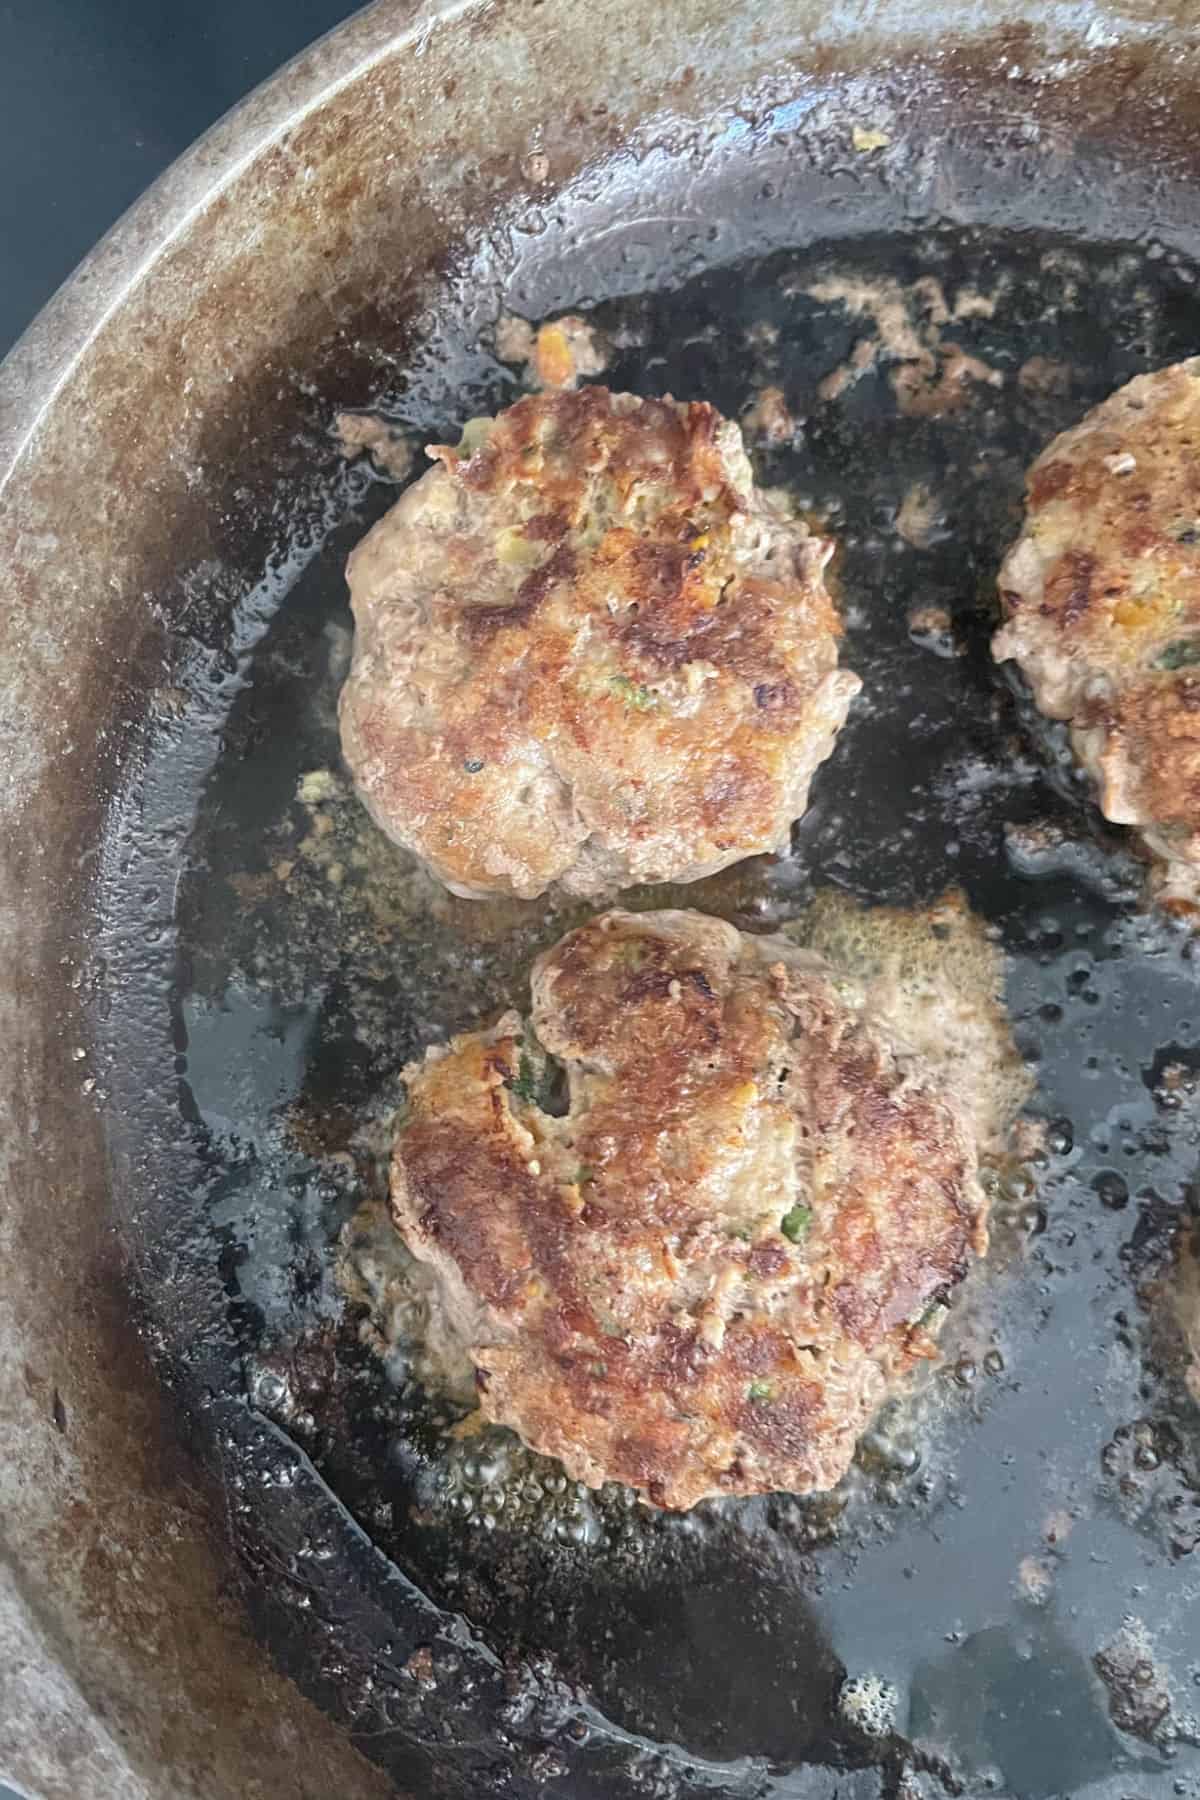 Beef rissoles cooking in a cast iron frying pan.